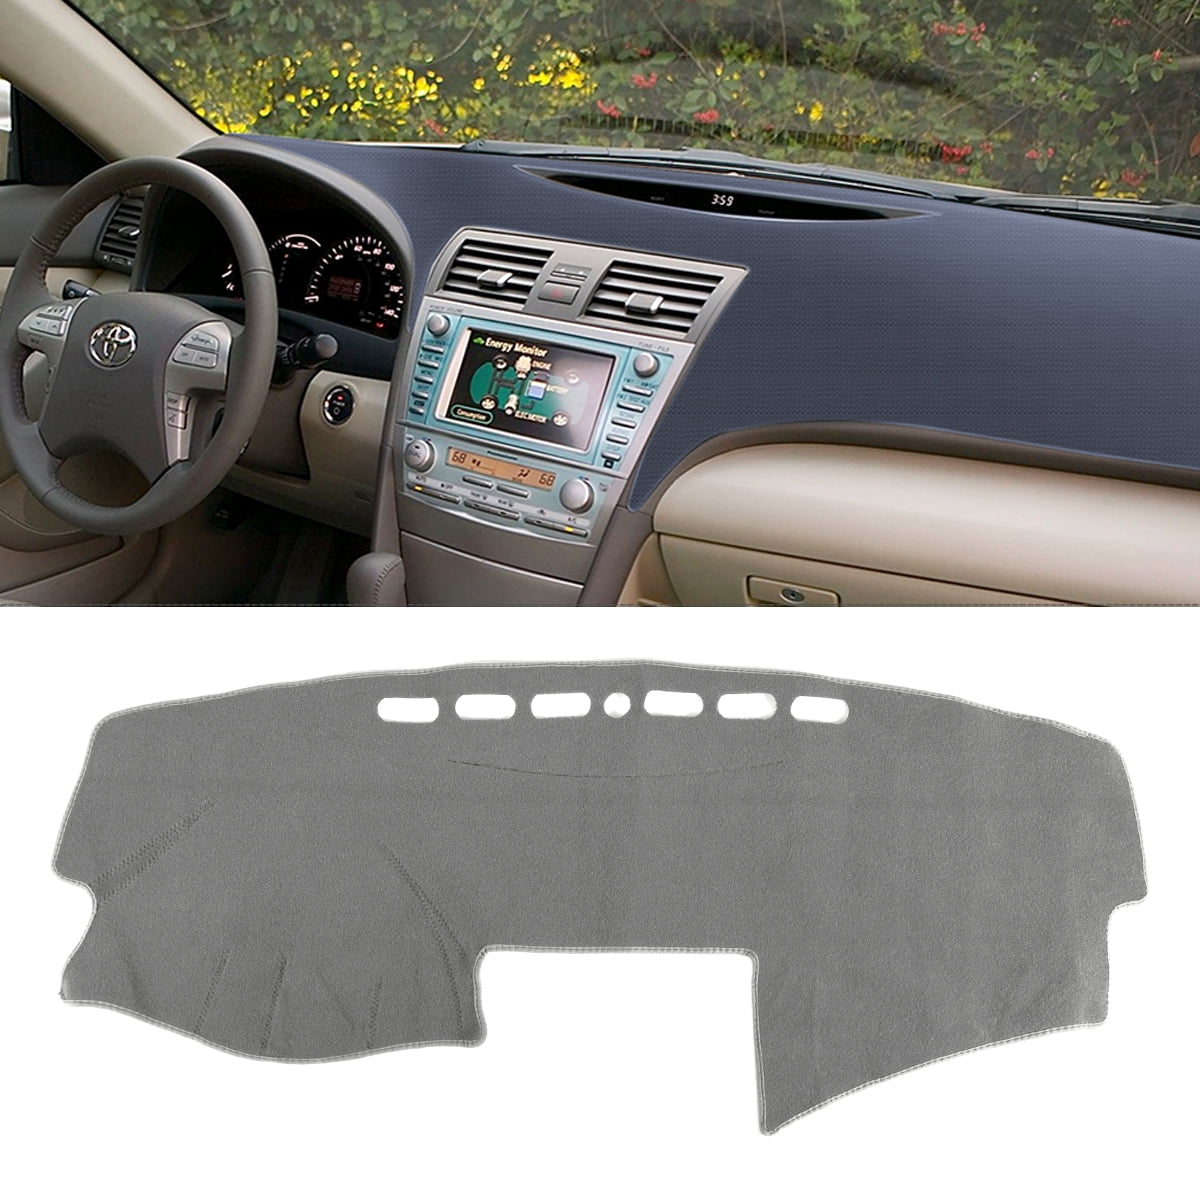 USDACOVE Dash Cover Dashboard Cover Mat Pad Custom Fit for Toyota Camry  2007 2008 2009 2010 2011(Charcoal Grey)